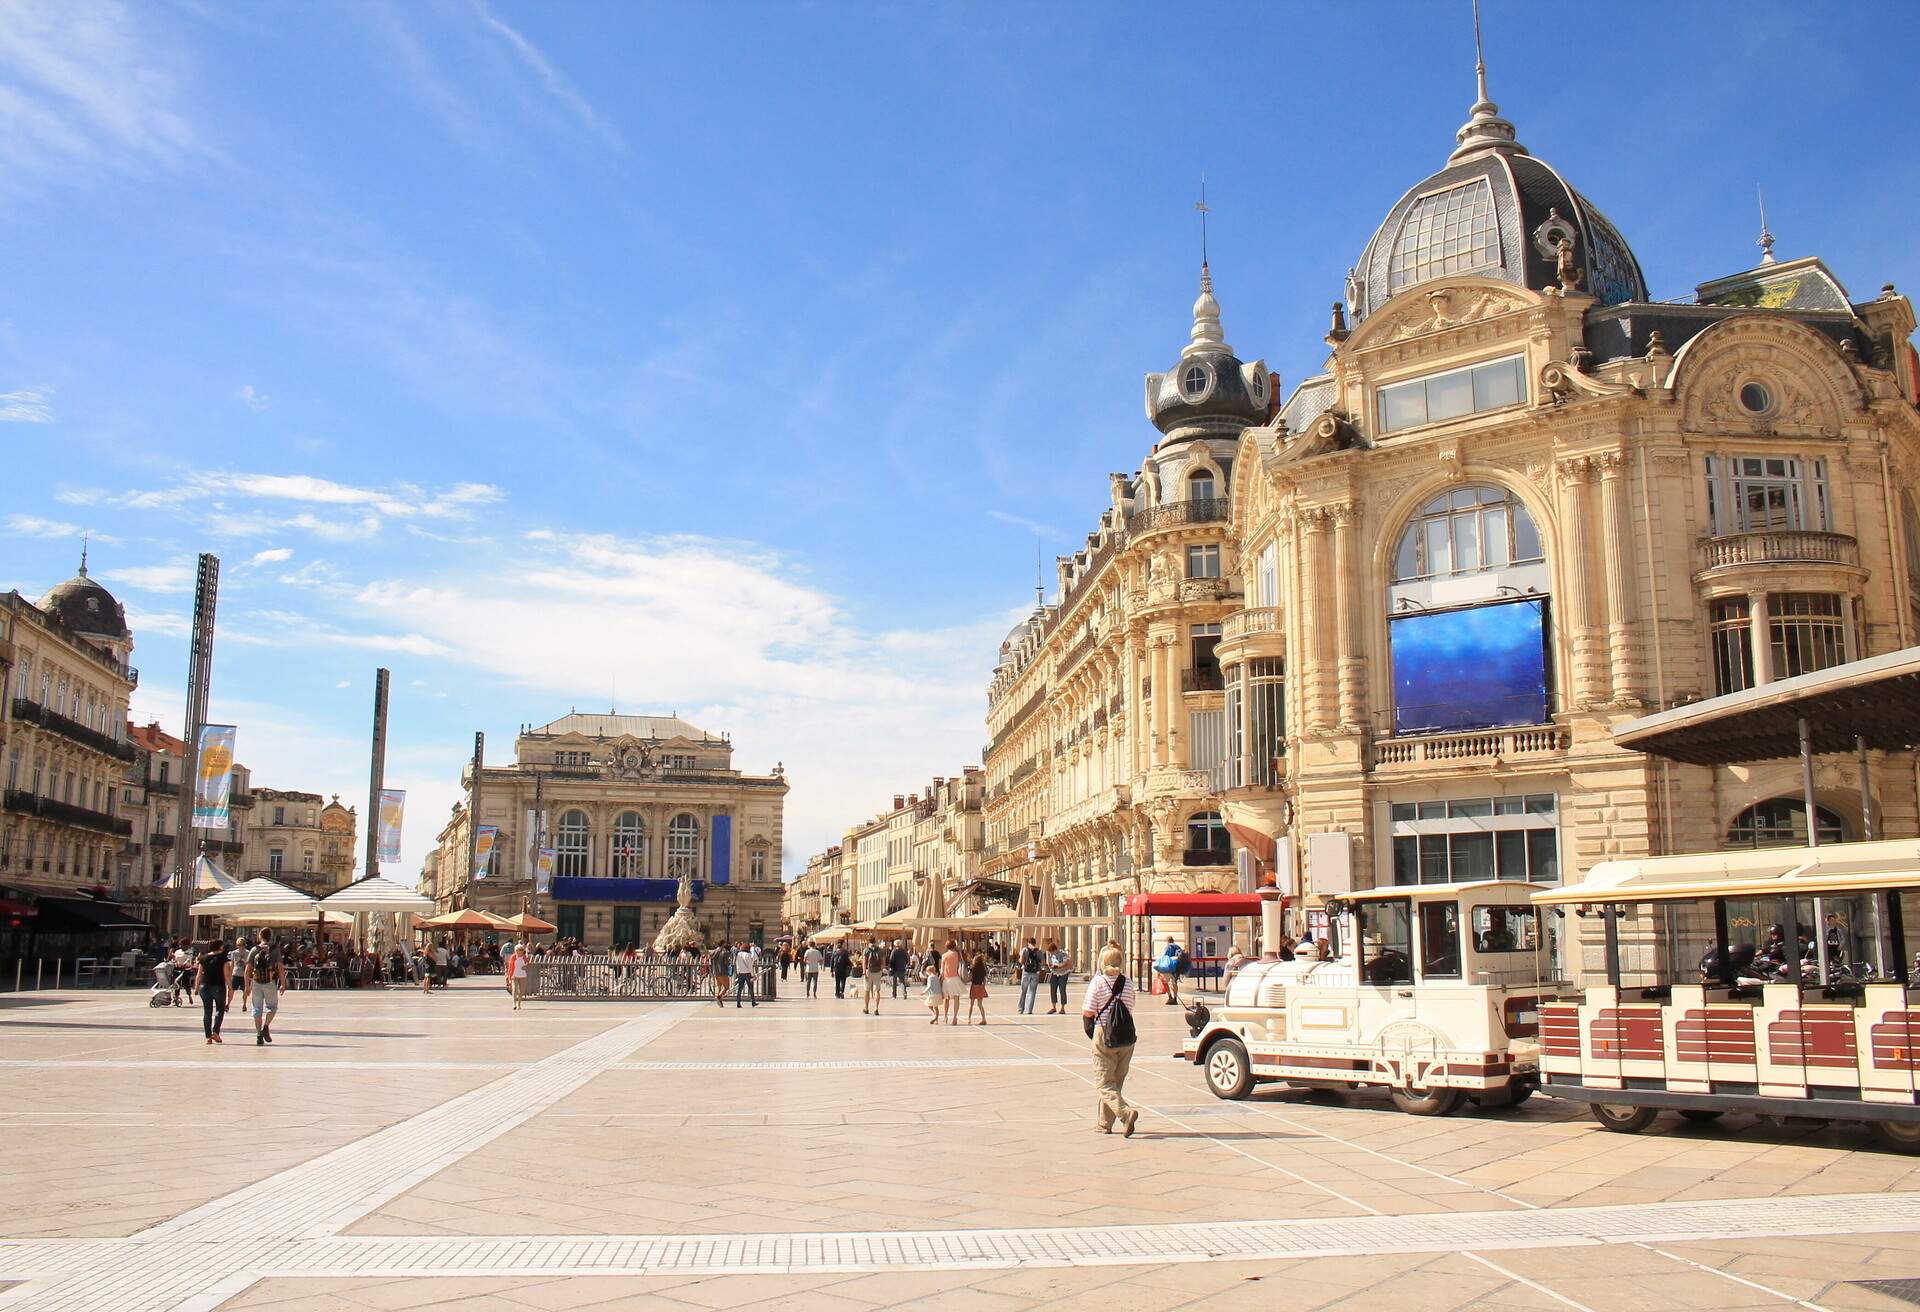 Comedy square in Montpellier, its opera and the three graces fountain, France